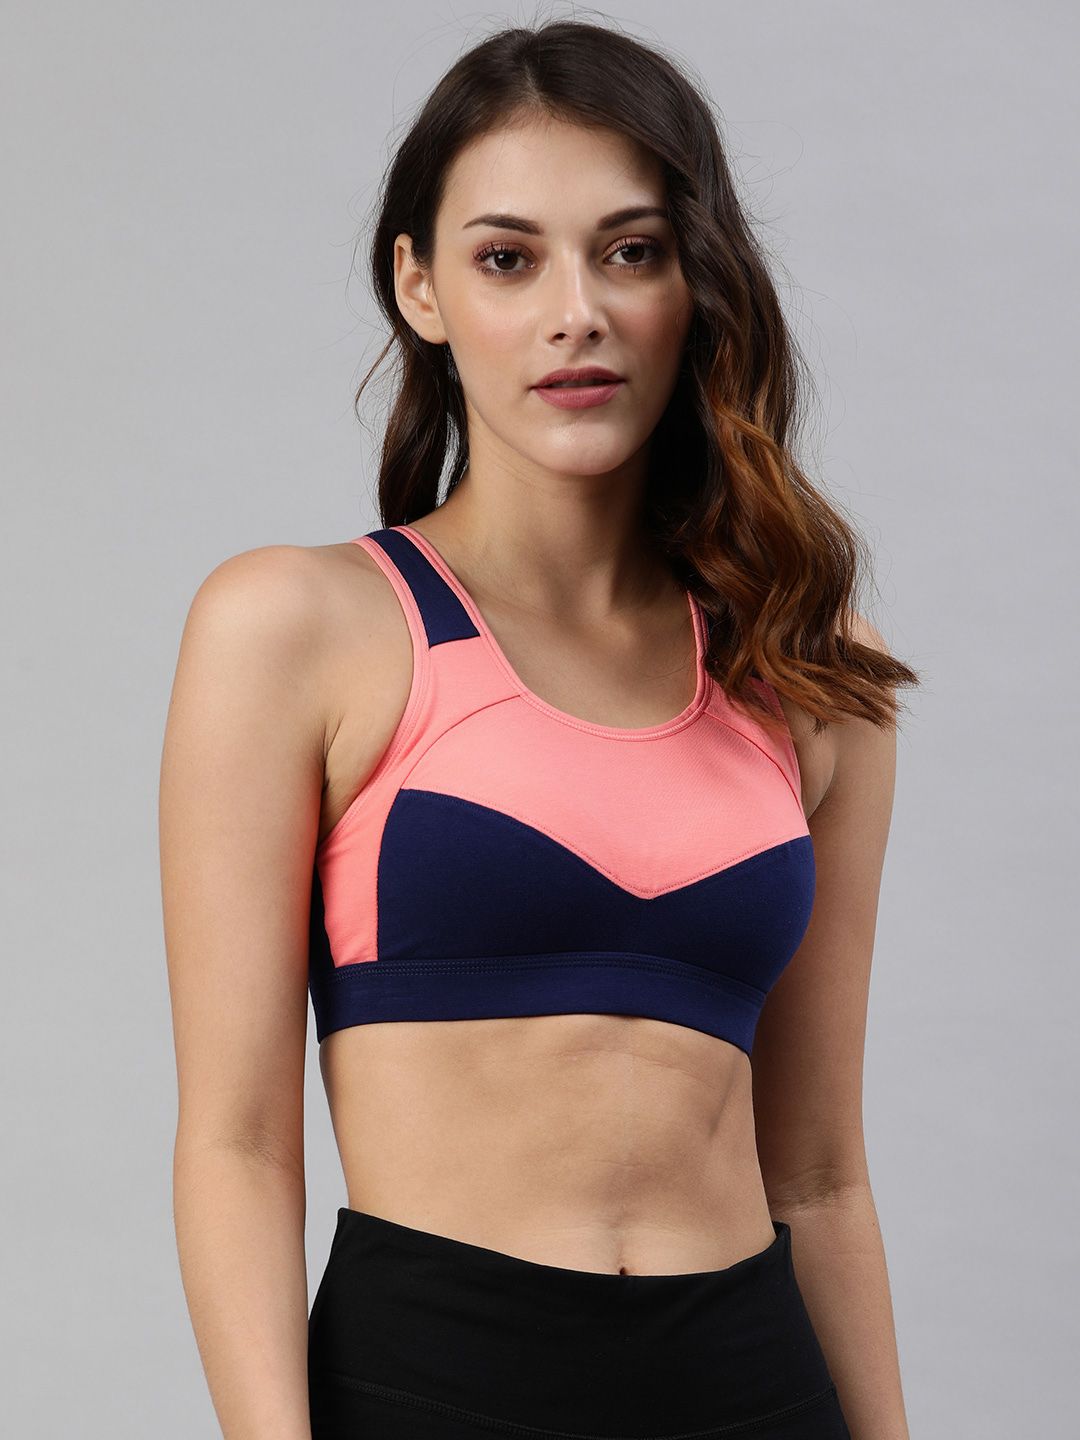 Van Heusen Navy Blue & Pink Colourblocked Non-Wired Lightly Padded Workout Bra Price in India